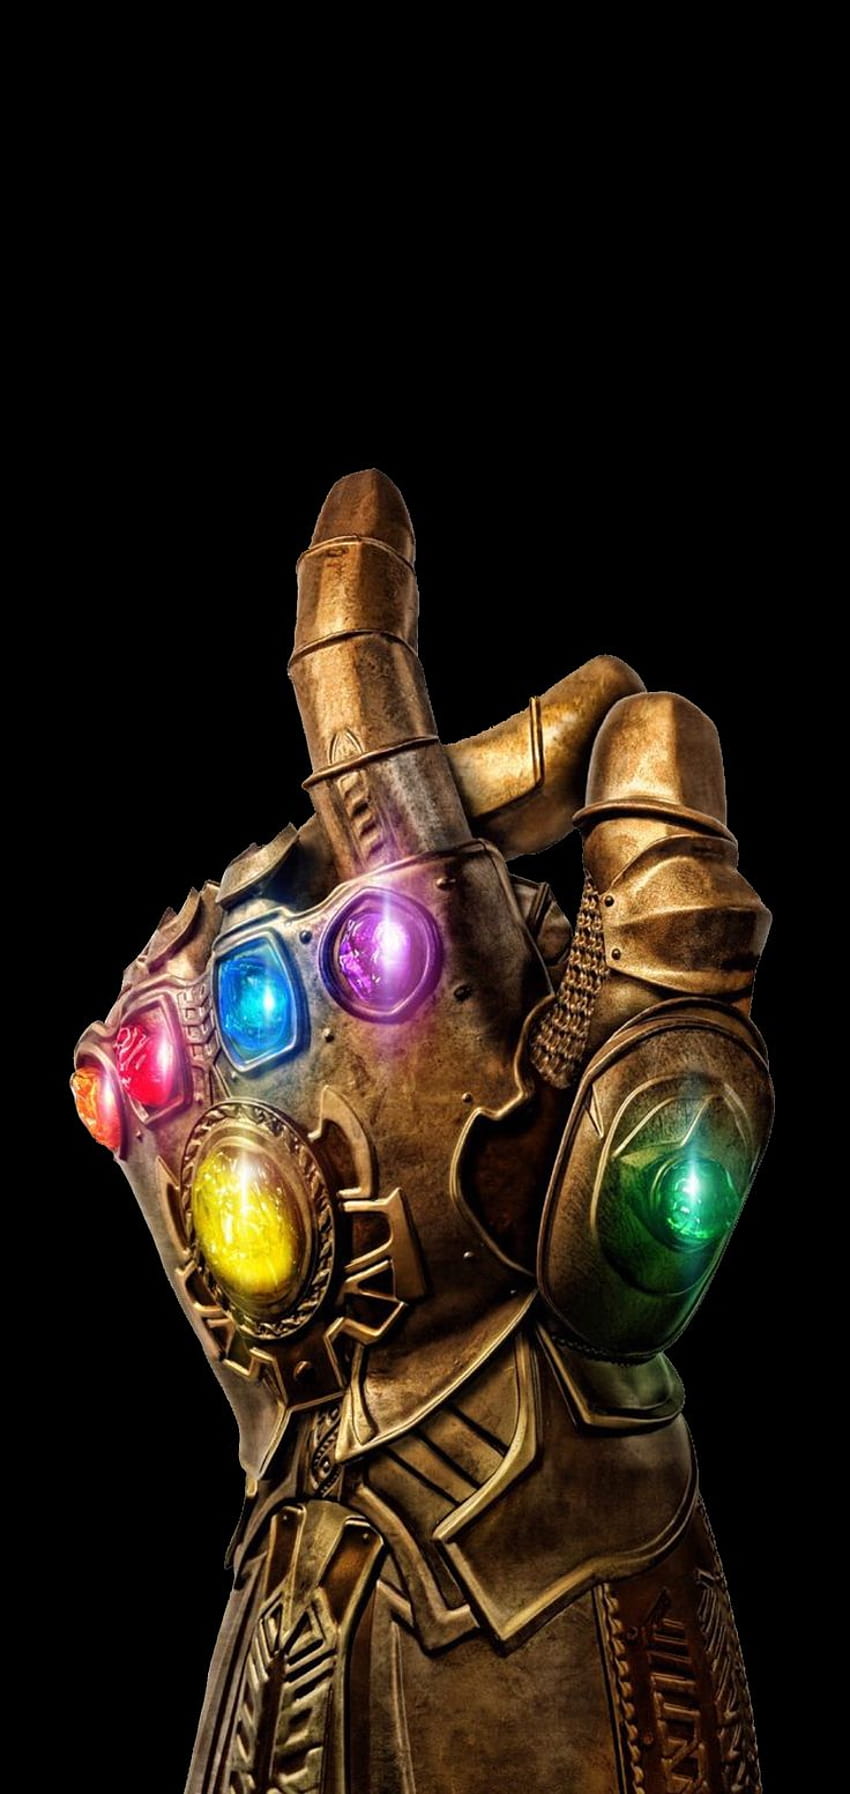 Infinity gauntlet thanos for phone, infinity gems HD phone wallpaper